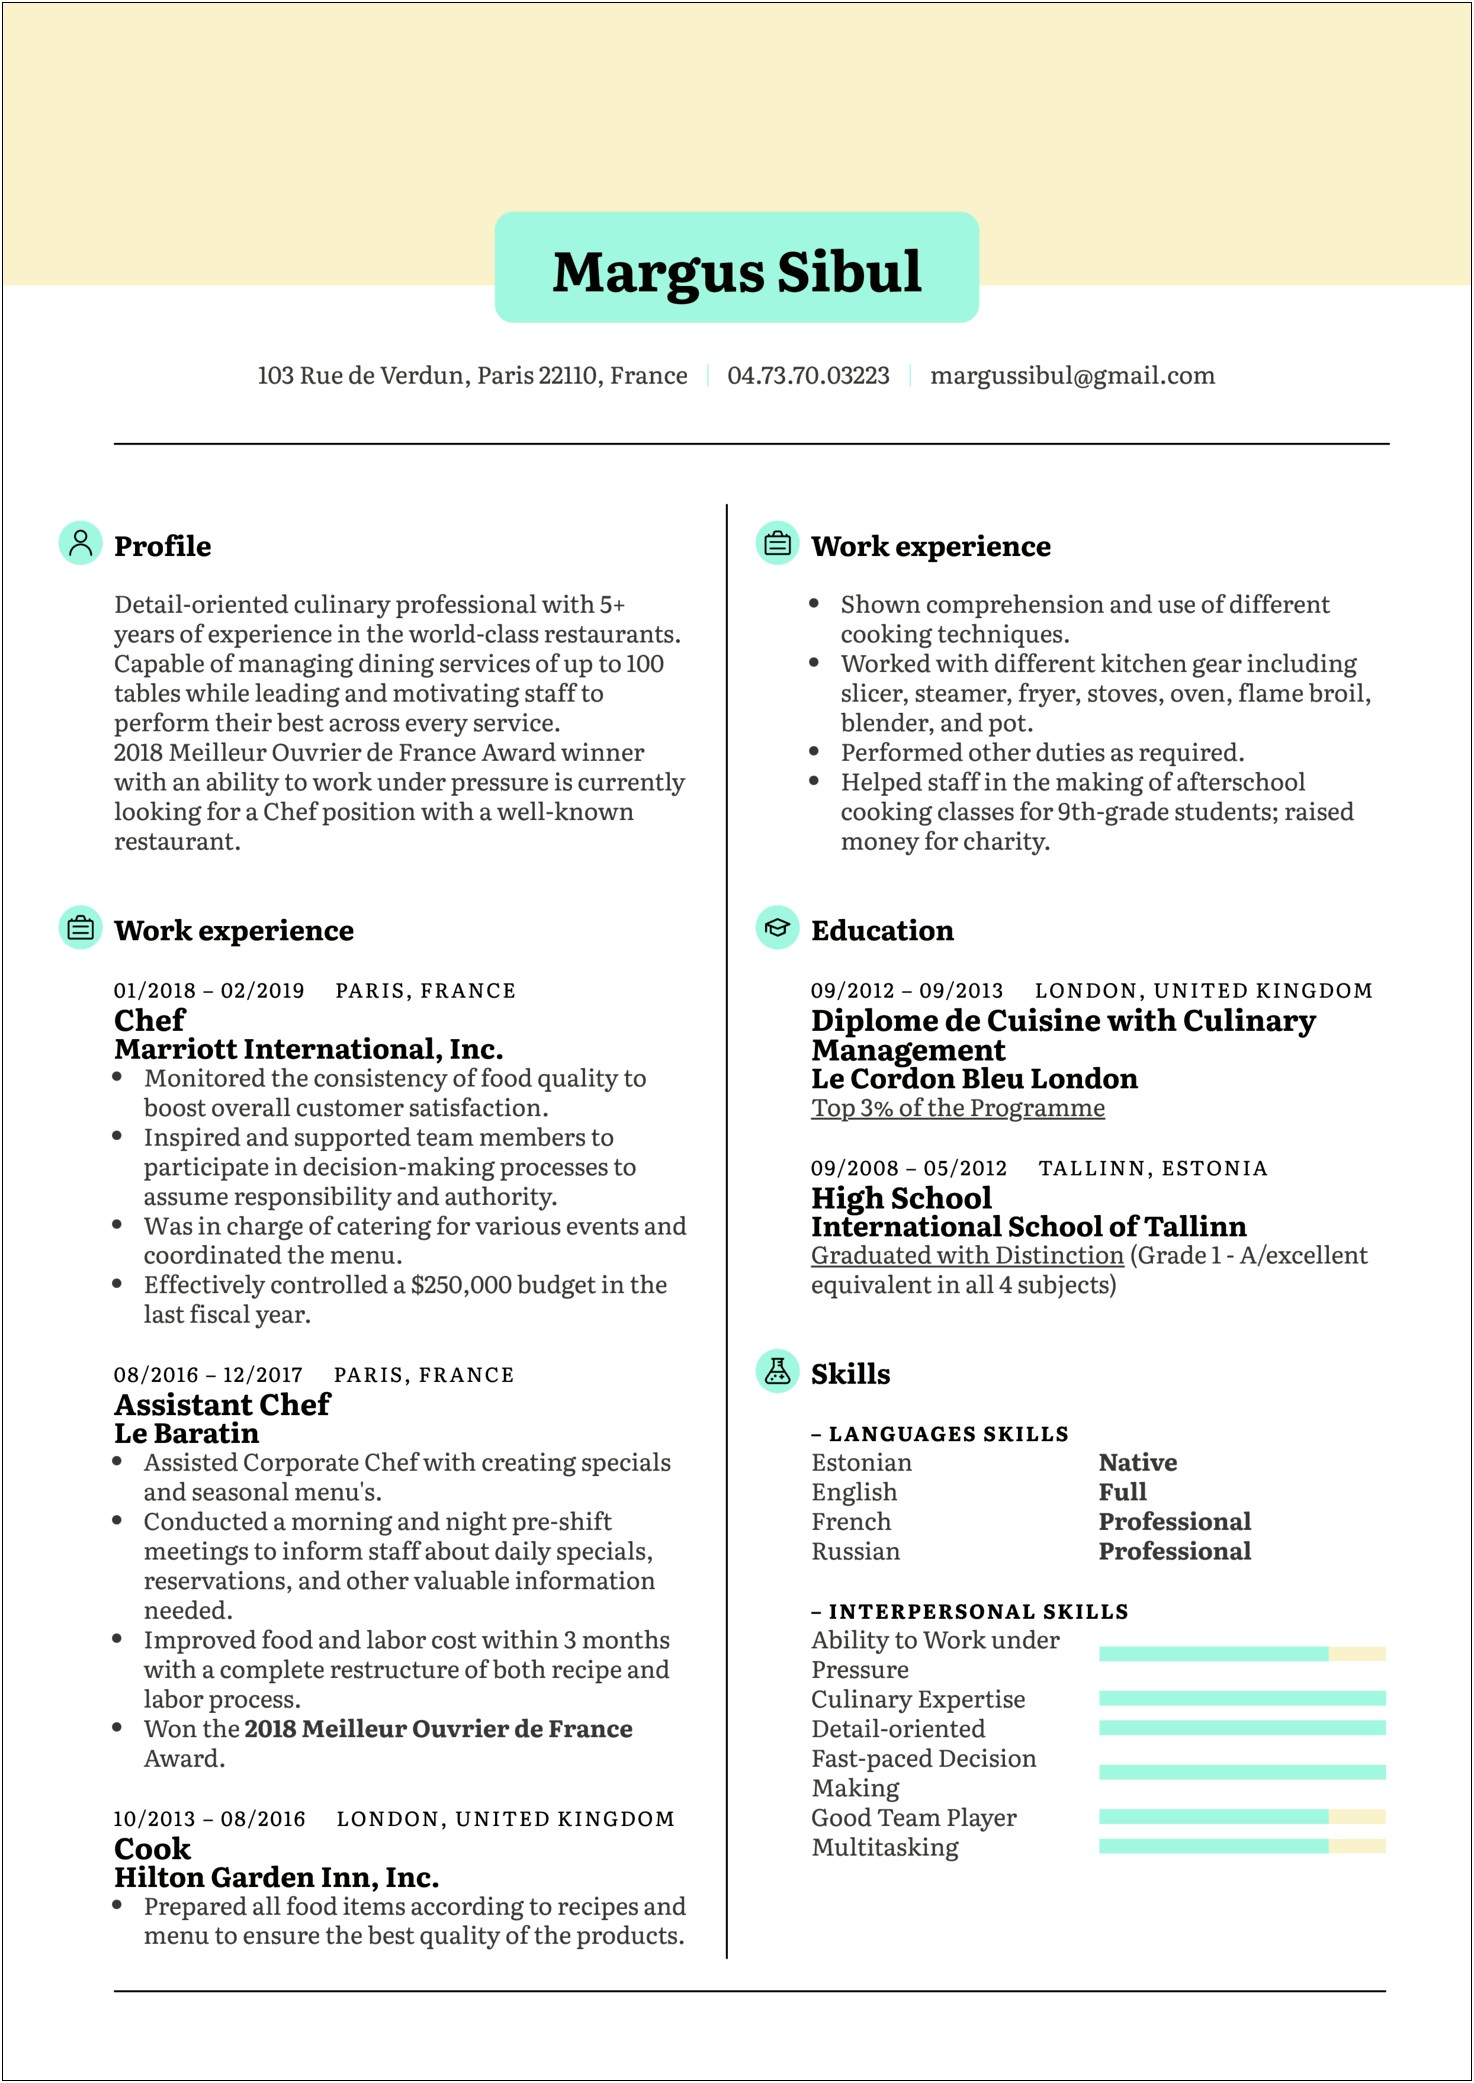 Catering Positions And Description For Resume